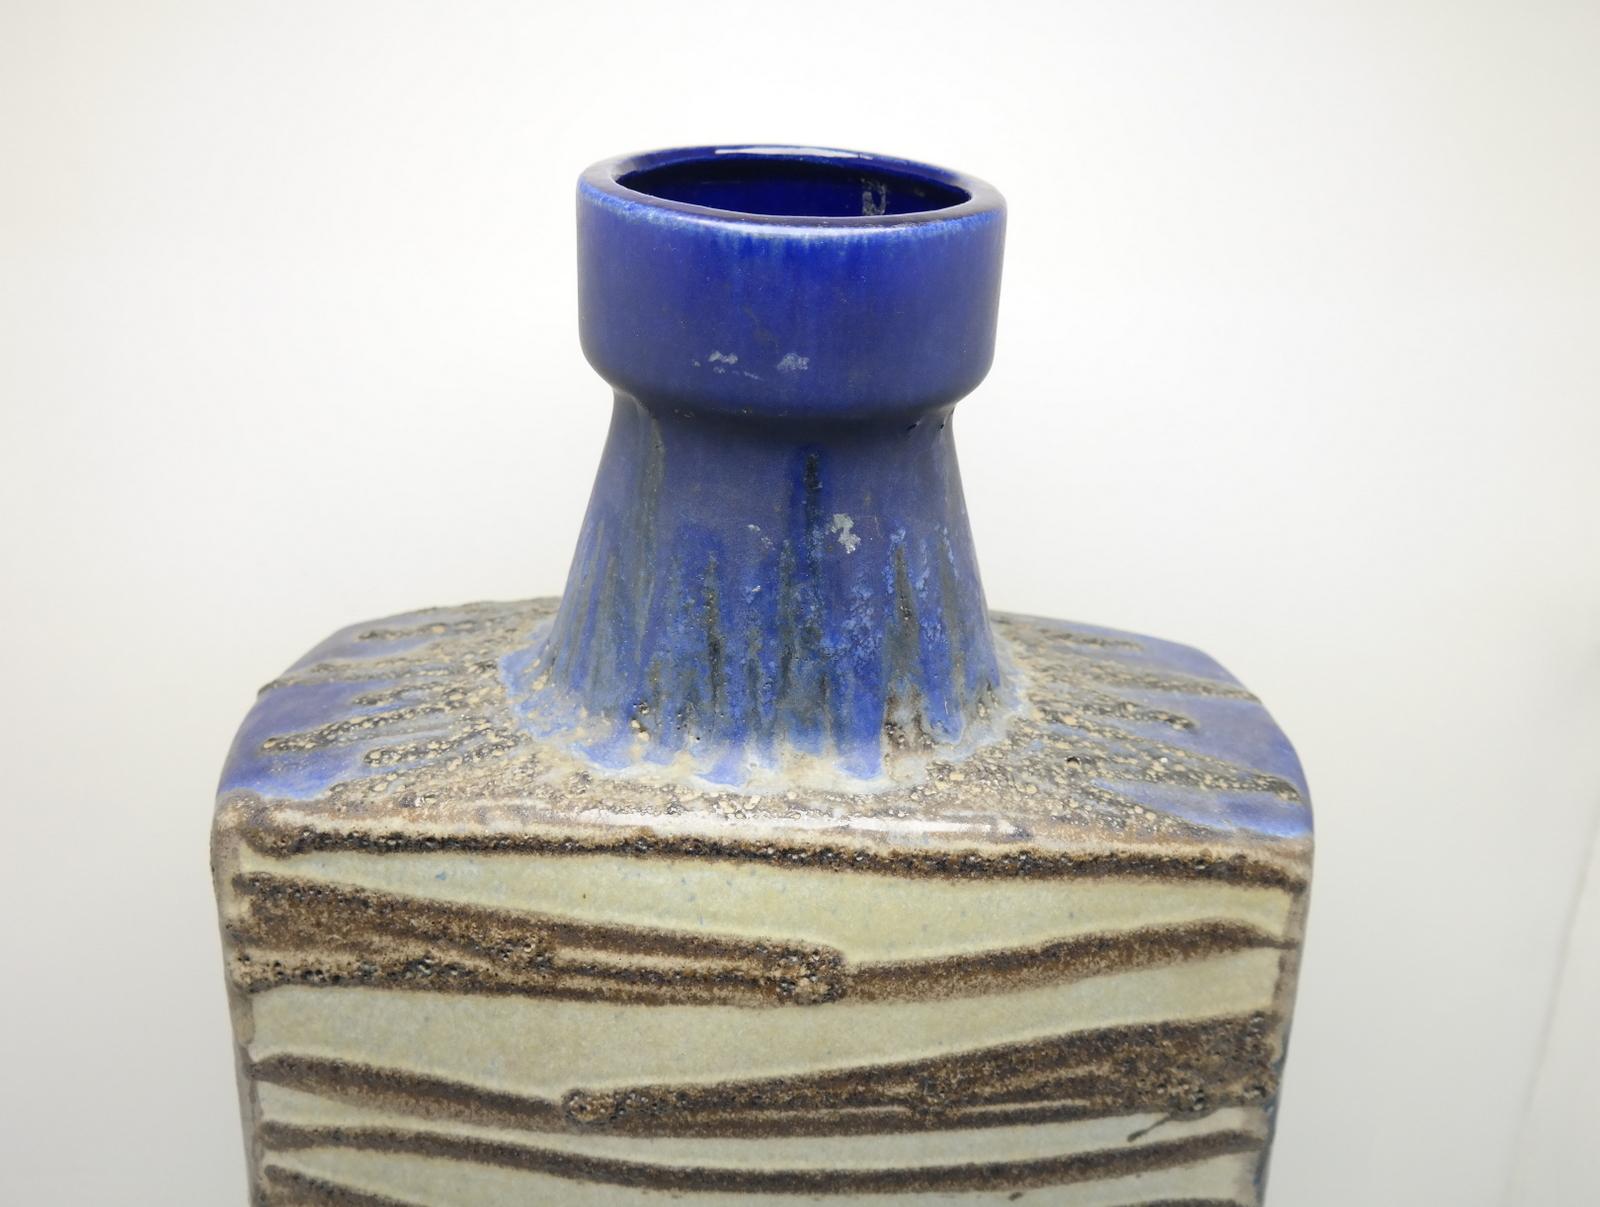 Giant Scheurich Iconic Zig Zag Vase, Blue Sand & Beige Glazed Ceramic, 1970's In Good Condition For Sale In Budapest, HU